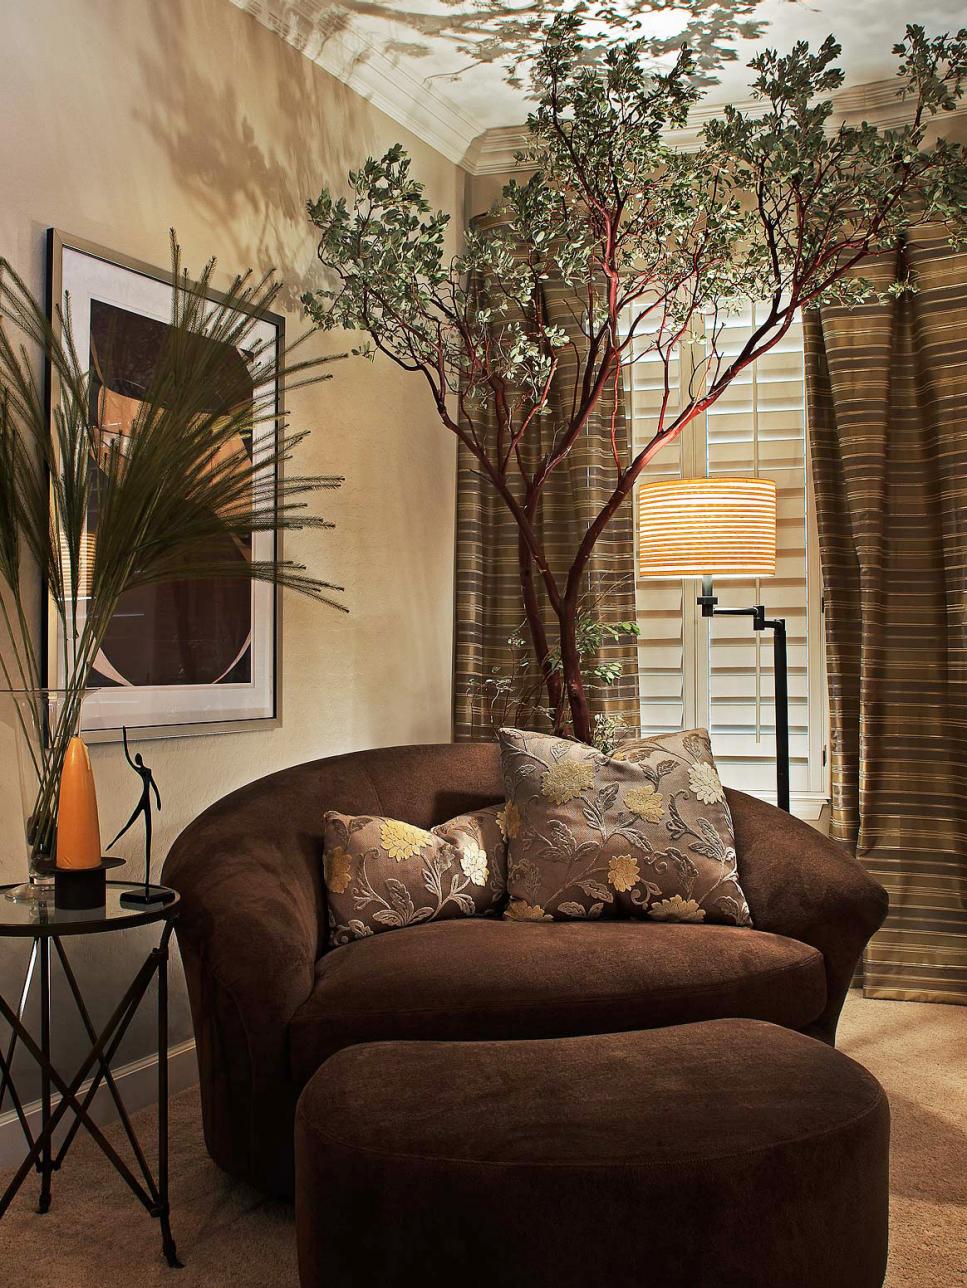 Brown Suede Chair in Contemporary Living Room | HGTV